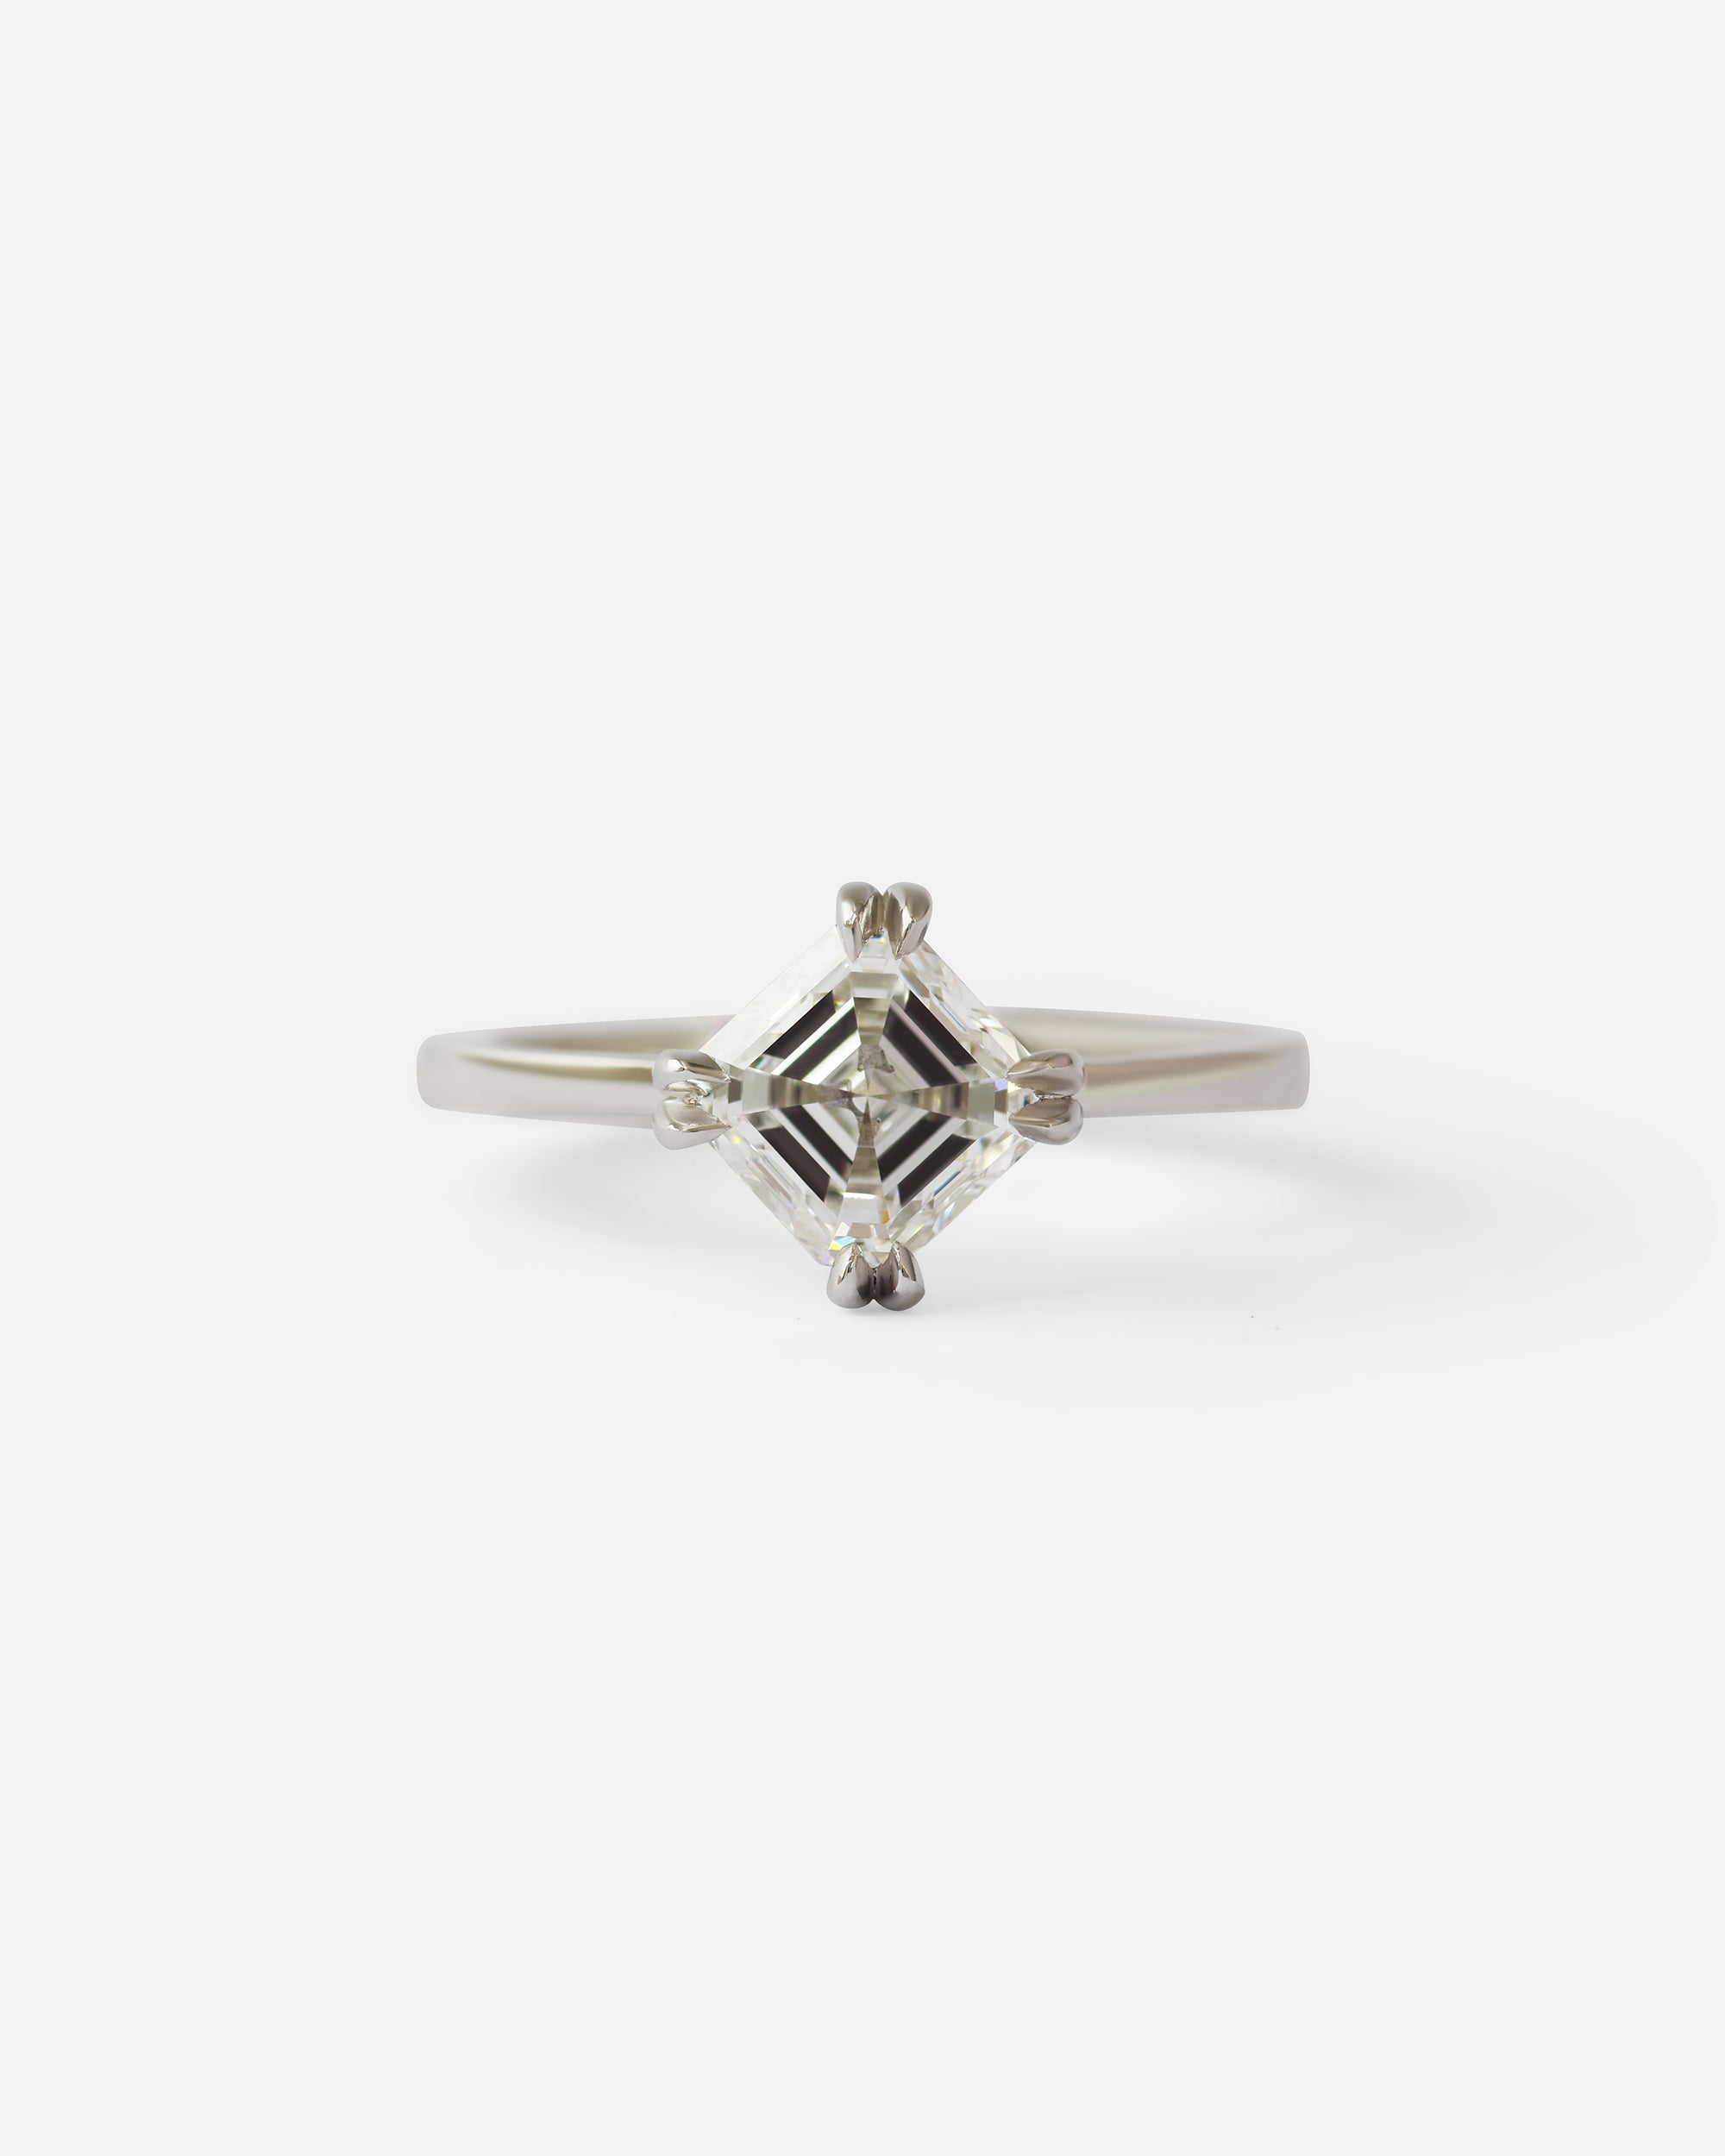 Ash / Asscher Cut Diamond Ring By fitzgerald jewelry in Engagement Rings Category